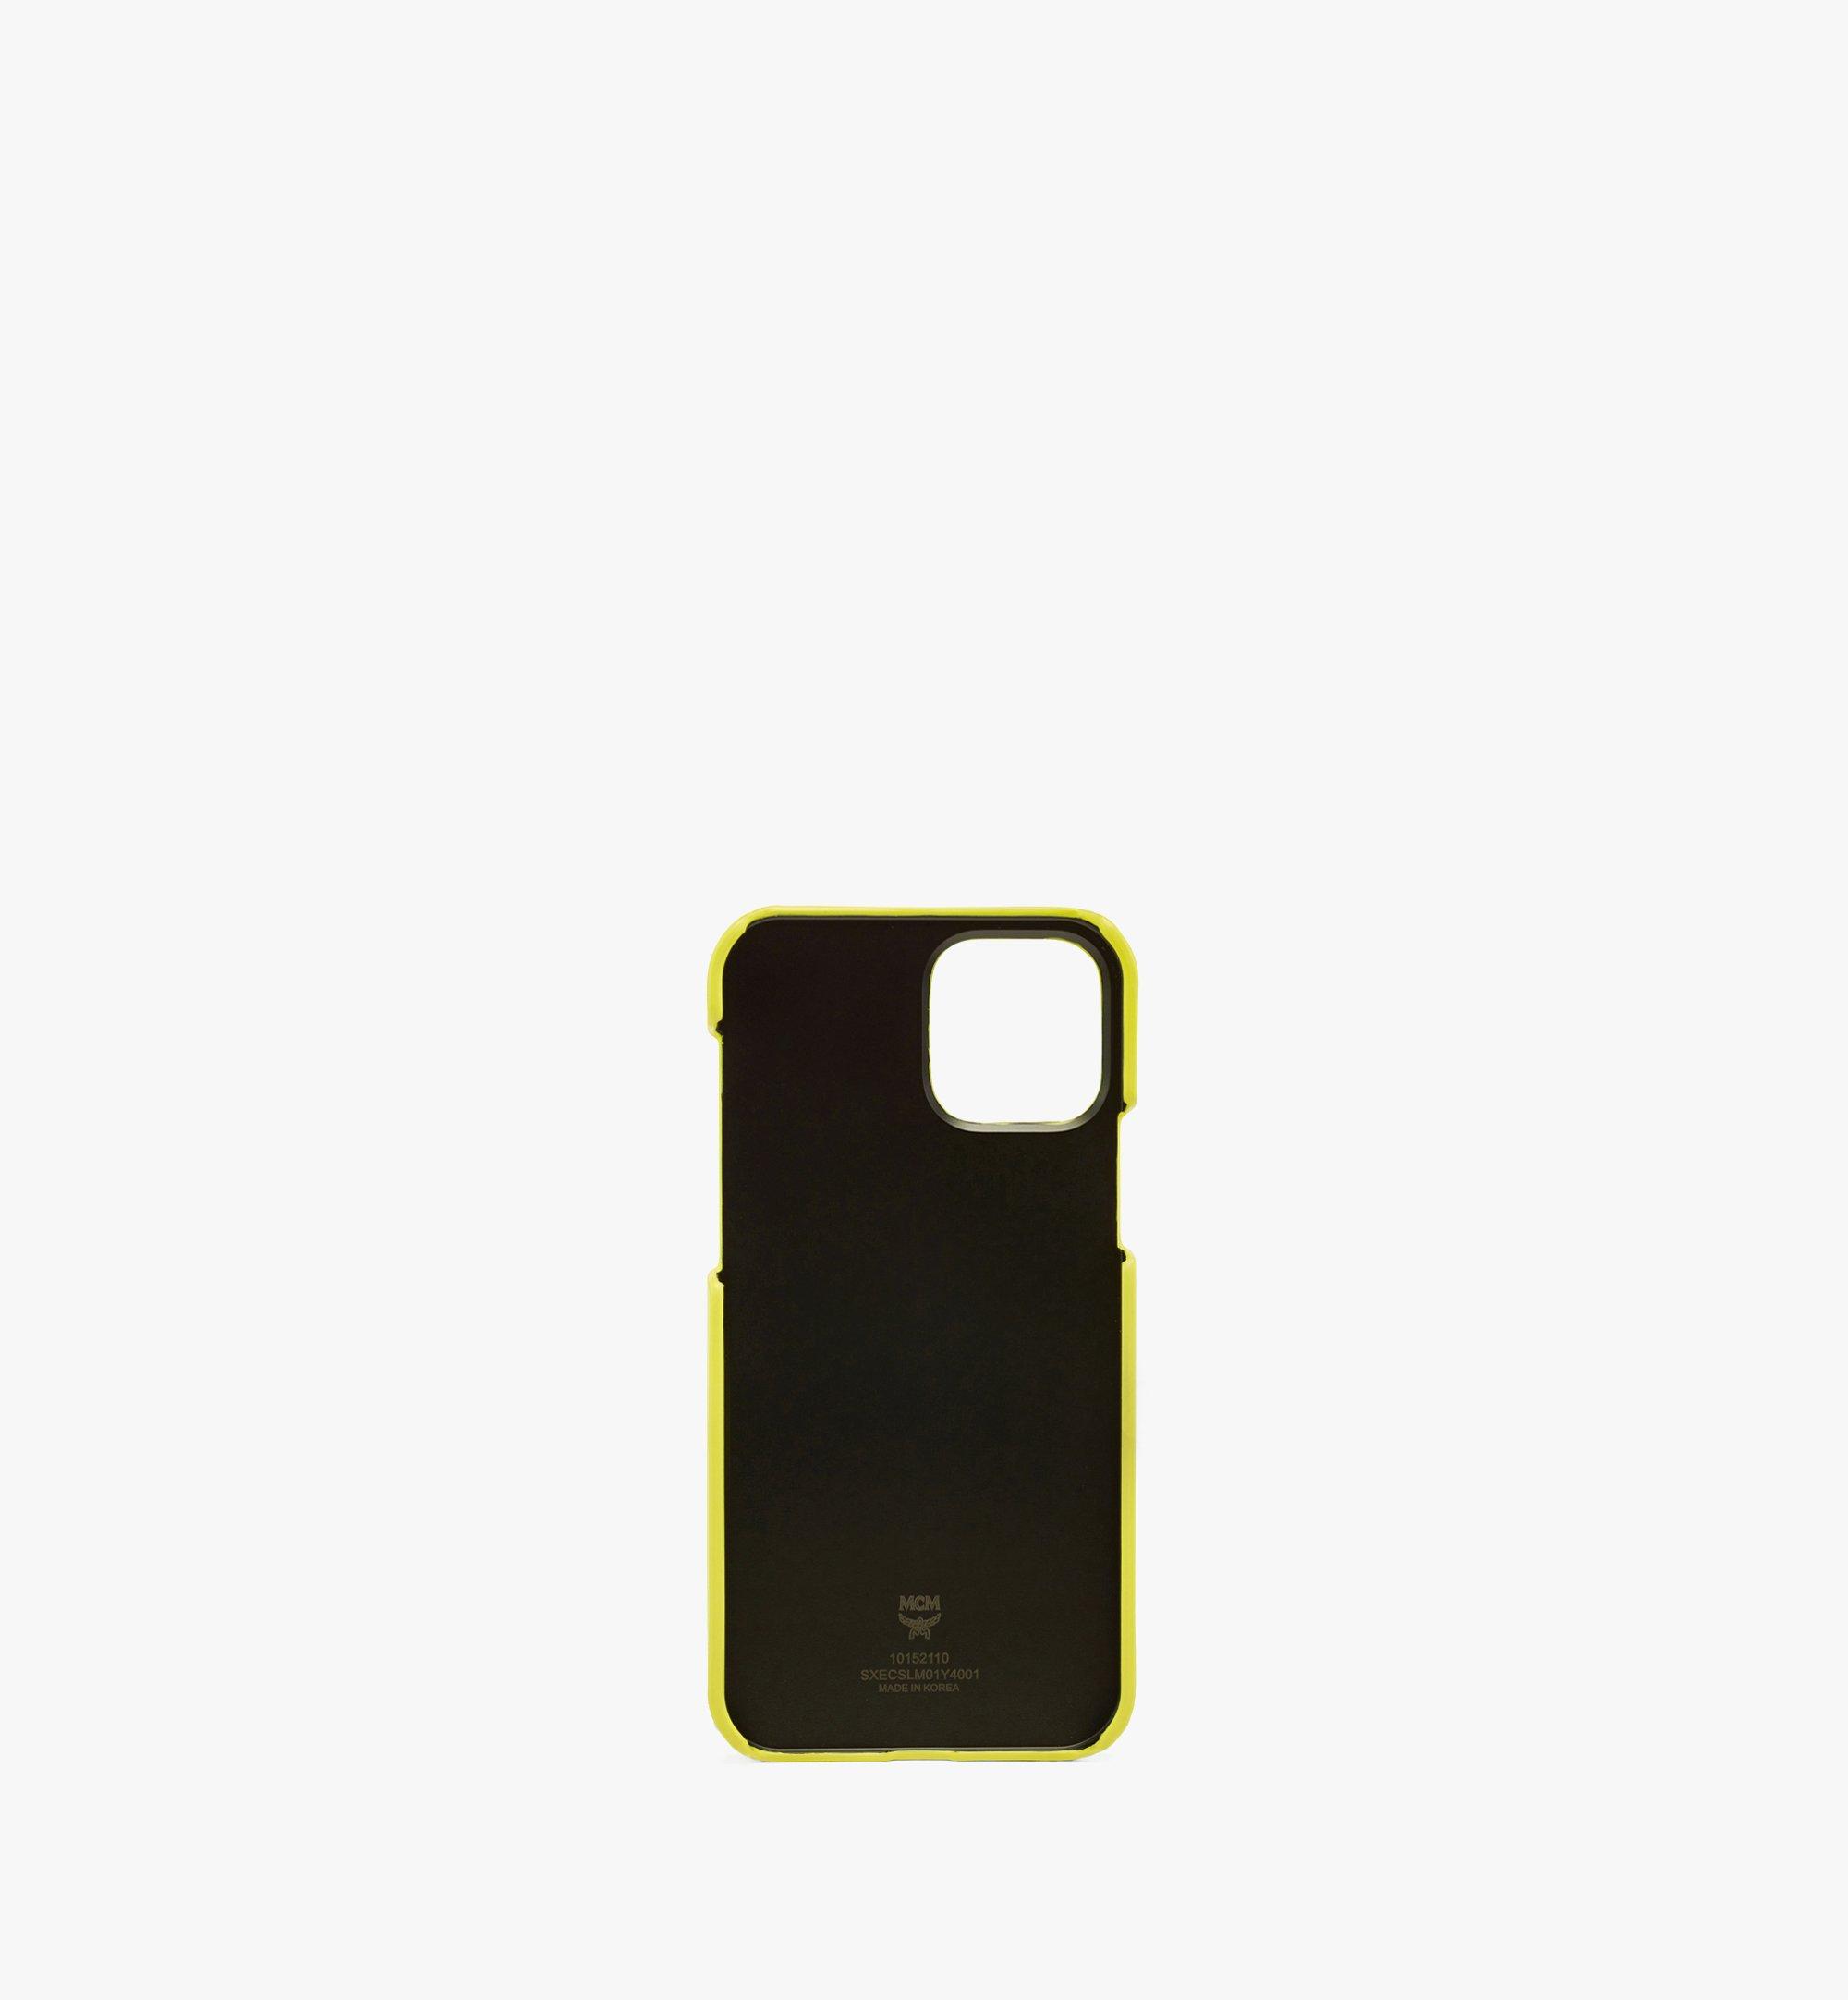 MCM Mode Travia iPhone 12/12 Pro Case with Pocket and Strap Yellow MXECSLM01Y4001 Alternate View 1